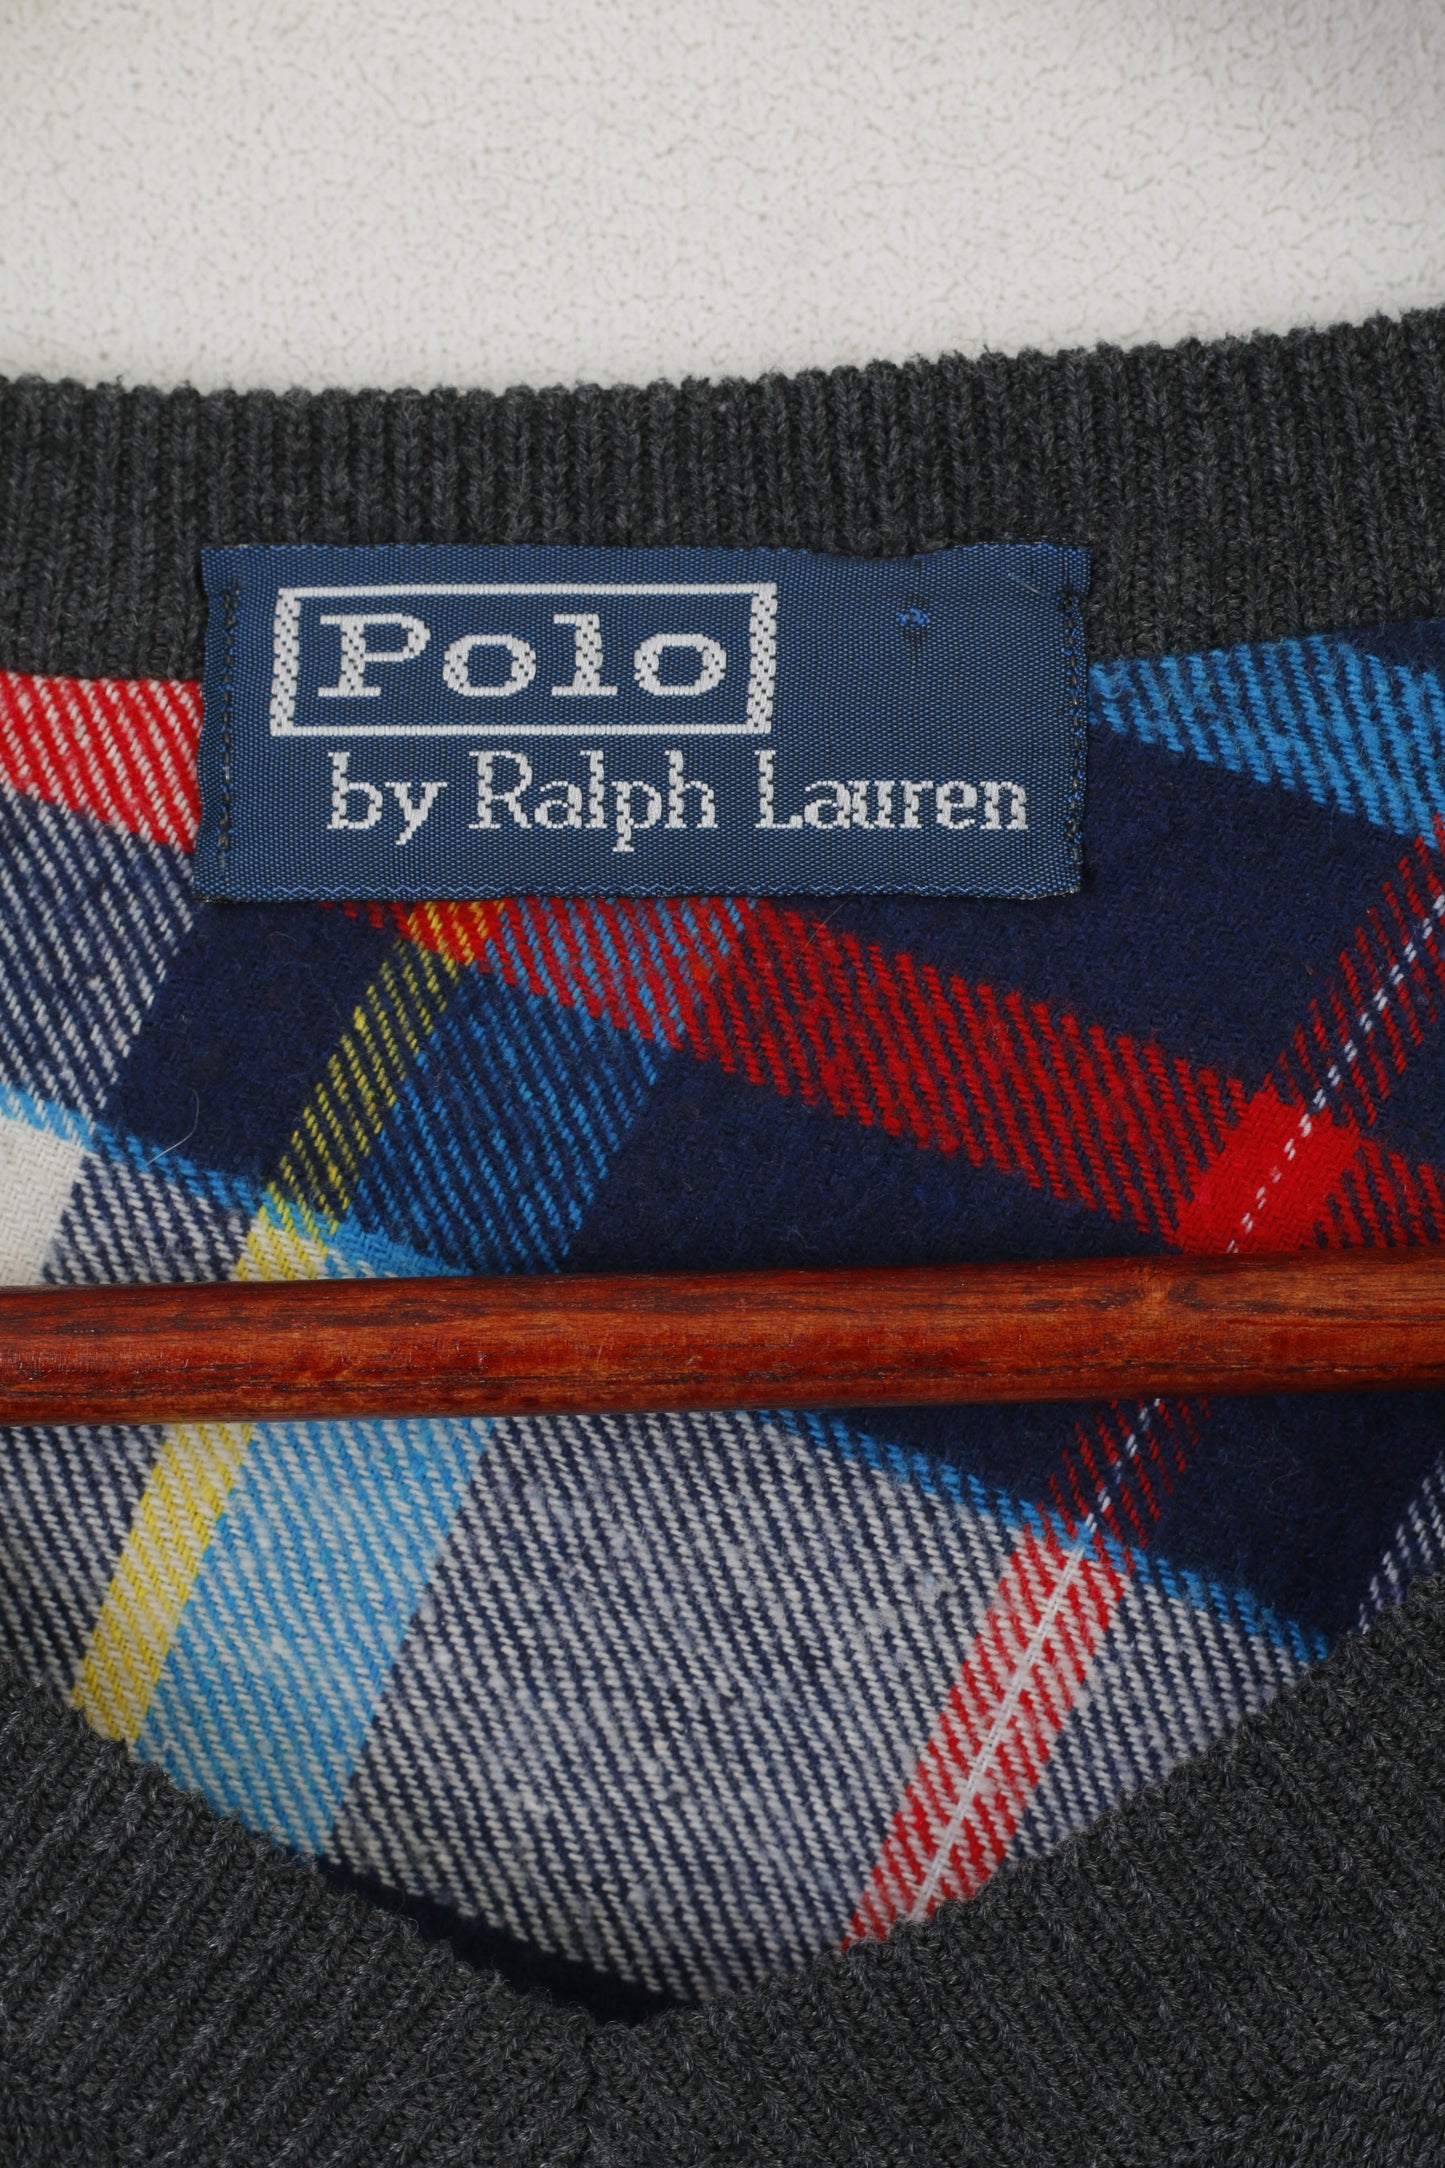 Polo by Ralph Lauren Men S Jumper Gray Wool V Neck Patches Vintage Sweater